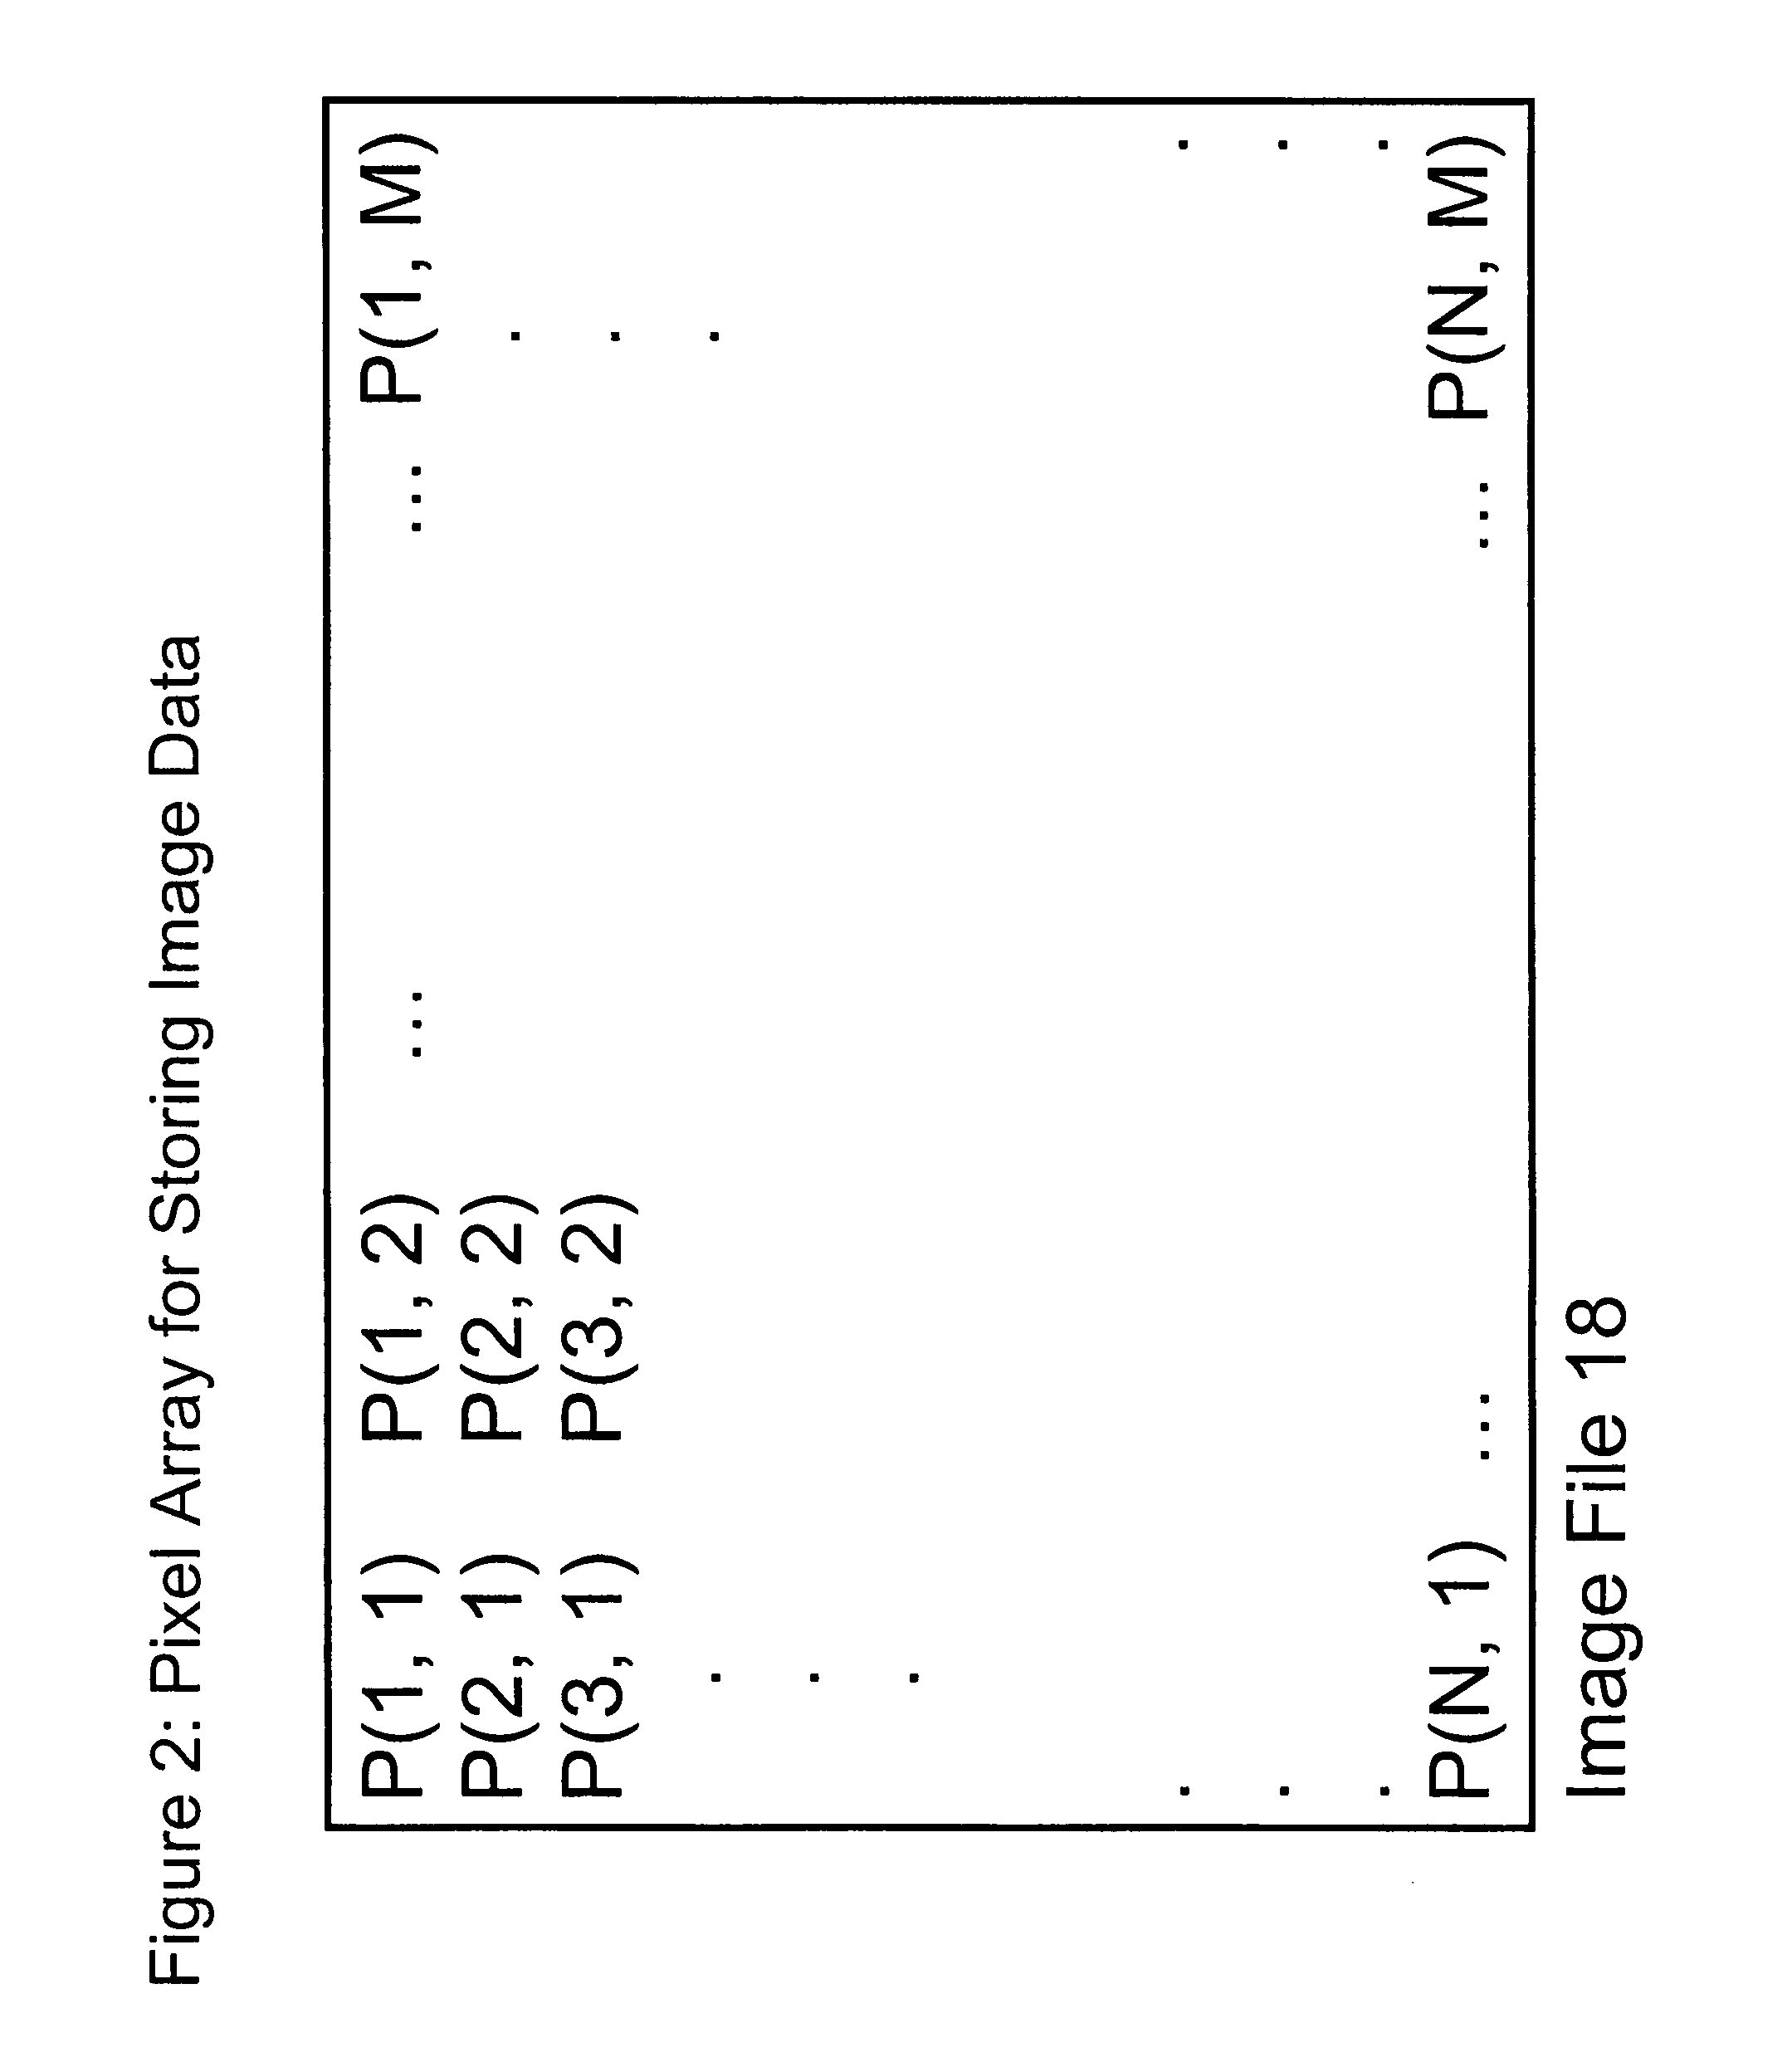 Method and system for optimizing an image for improved analysis of material and illumination image features